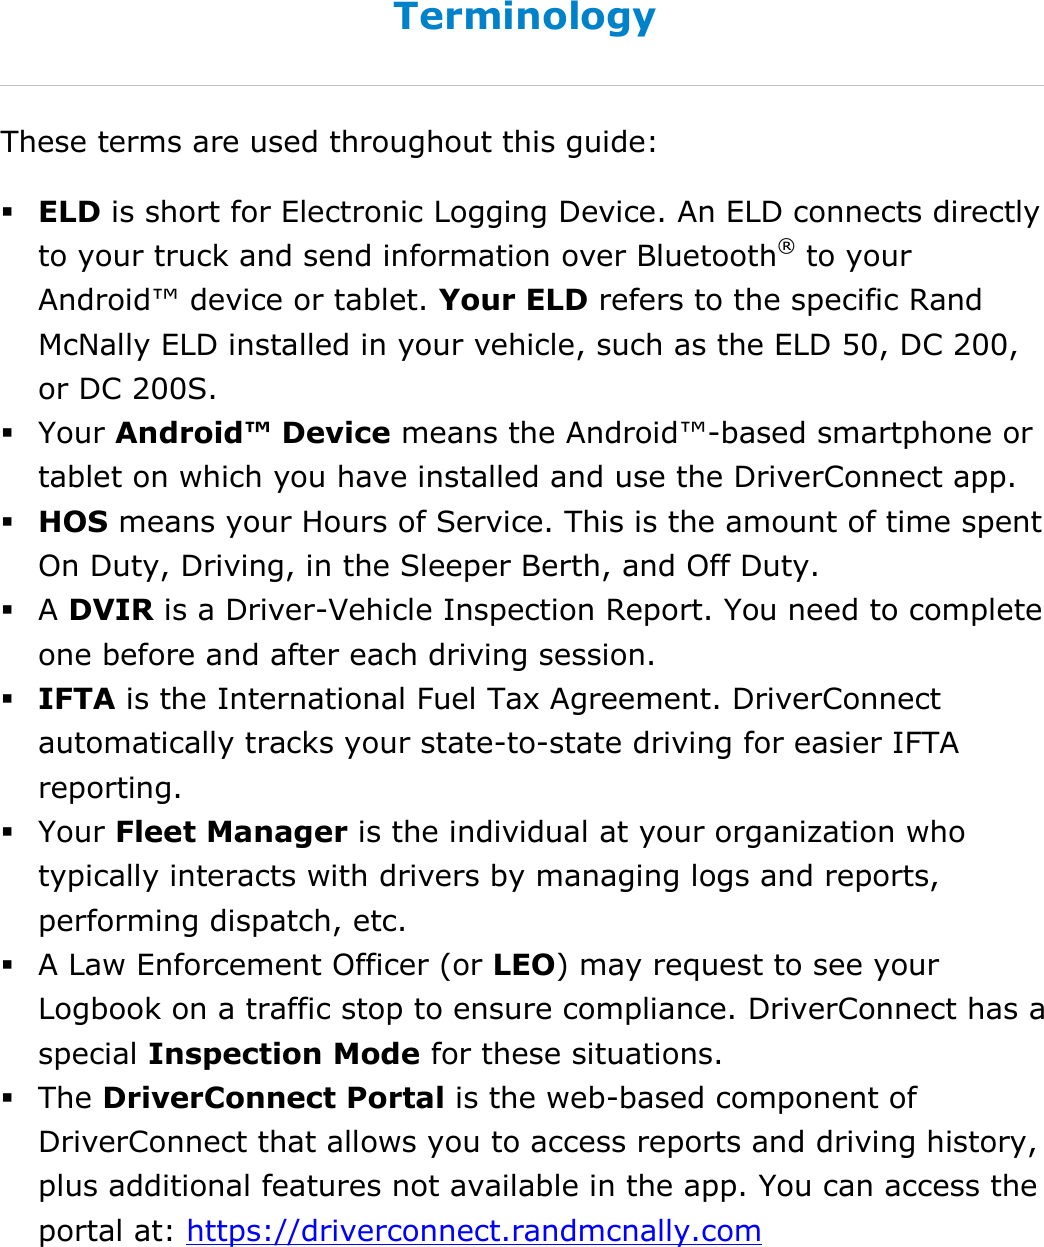 About This Guide DriverConnect User Guide  6 © 2017, Rand McNally, Inc. Terminology These terms are used throughout this guide:  ELD is short for Electronic Logging Device. An ELD connects directly to your truck and send information over Bluetooth® to your Android™ device or tablet. Your ELD refers to the specific Rand McNally ELD installed in your vehicle, such as the ELD 50, DC 200, or DC 200S.  Your Android™ Device means the Android™-based smartphone or tablet on which you have installed and use the DriverConnect app.  HOS means your Hours of Service. This is the amount of time spent On Duty, Driving, in the Sleeper Berth, and Off Duty.  A DVIR is a Driver-Vehicle Inspection Report. You need to complete one before and after each driving session.  IFTA is the International Fuel Tax Agreement. DriverConnect automatically tracks your state-to-state driving for easier IFTA reporting.  Your Fleet Manager is the individual at your organization who typically interacts with drivers by managing logs and reports, performing dispatch, etc.   A Law Enforcement Officer (or LEO) may request to see your Logbook on a traffic stop to ensure compliance. DriverConnect has a special Inspection Mode for these situations.  The DriverConnect Portal is the web-based component of DriverConnect that allows you to access reports and driving history, plus additional features not available in the app. You can access the portal at: https://driverconnect.randmcnally.com  